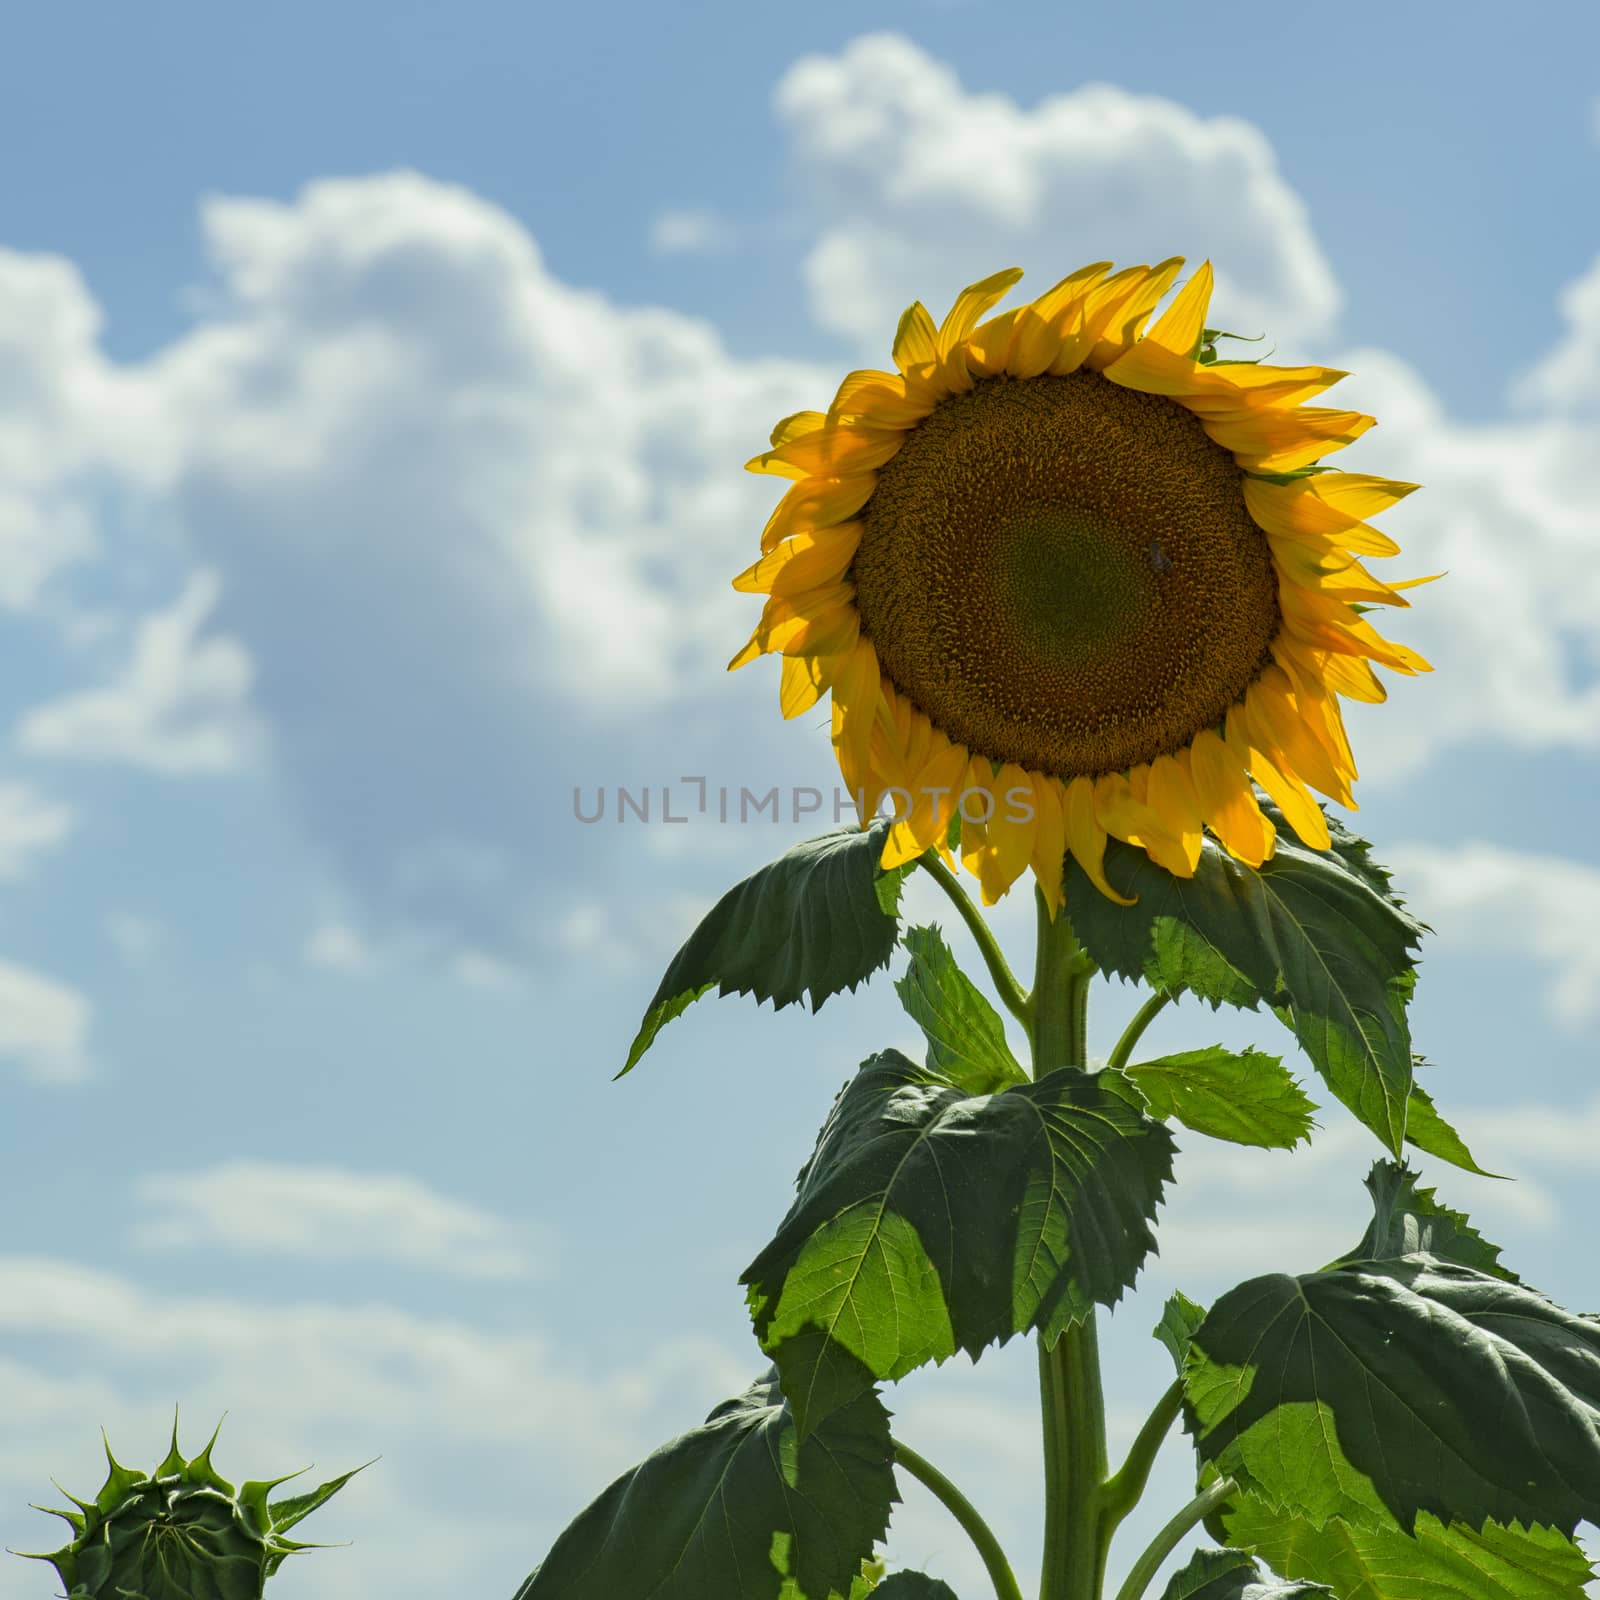 Sunflowers amongst a field in the afternoon in Nobby, Toowoomba Region, Queensland.